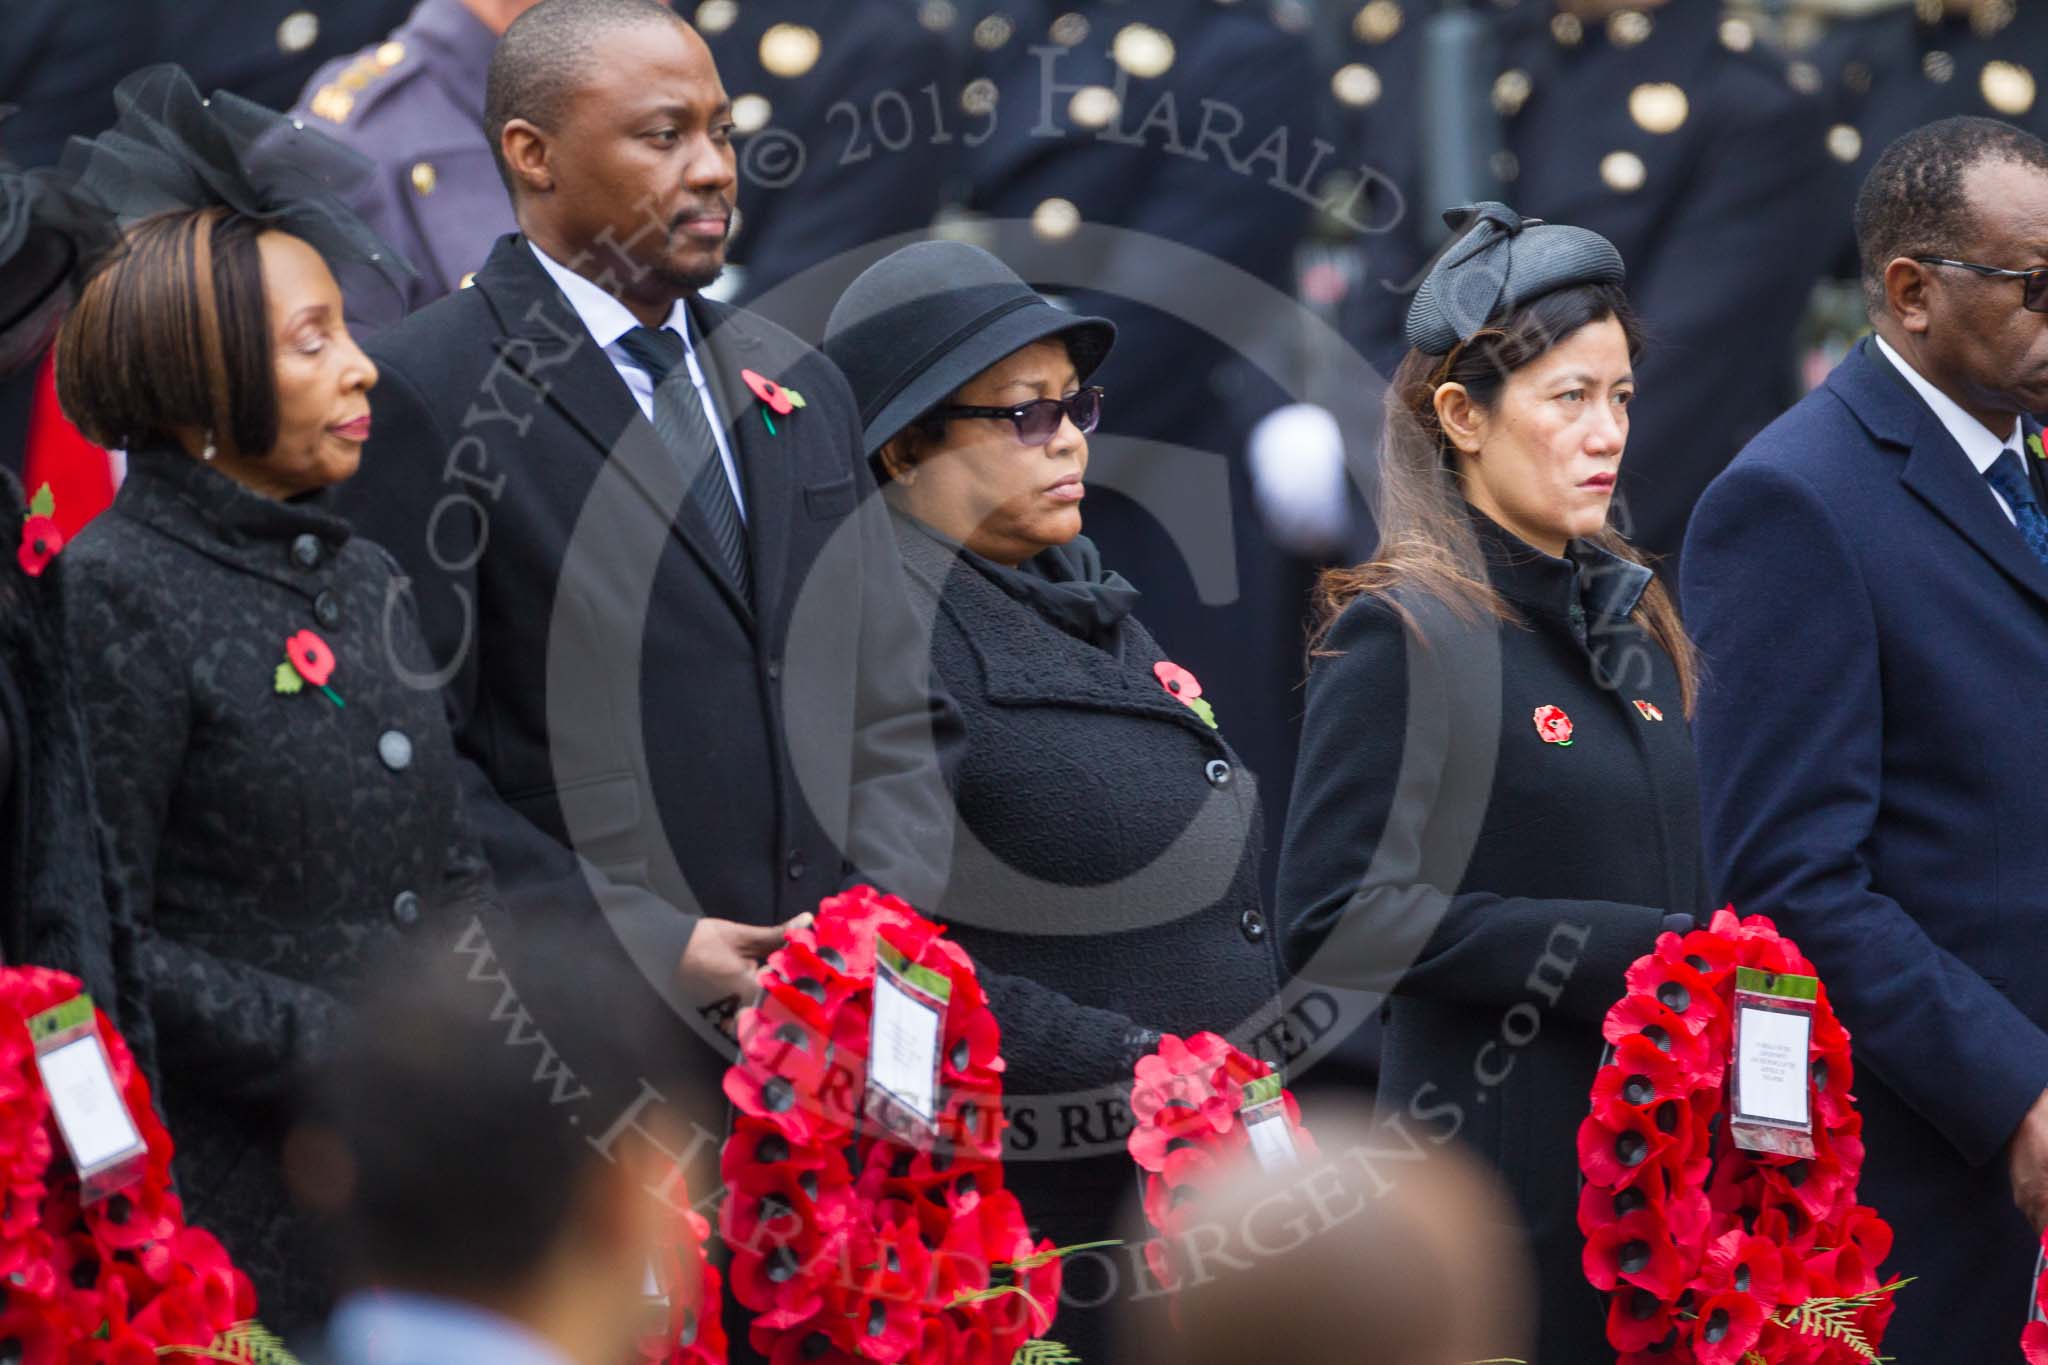 Remembrance Sunday at the Cenotaph 2015: The High Commissioner of Lesotho, the Charge D’Affaires of Botswana, the High Commissioner of Guyana, and the High Commissioner of Singapore. Image #229, 08 November 2015 11:09 Whitehall, London, UK